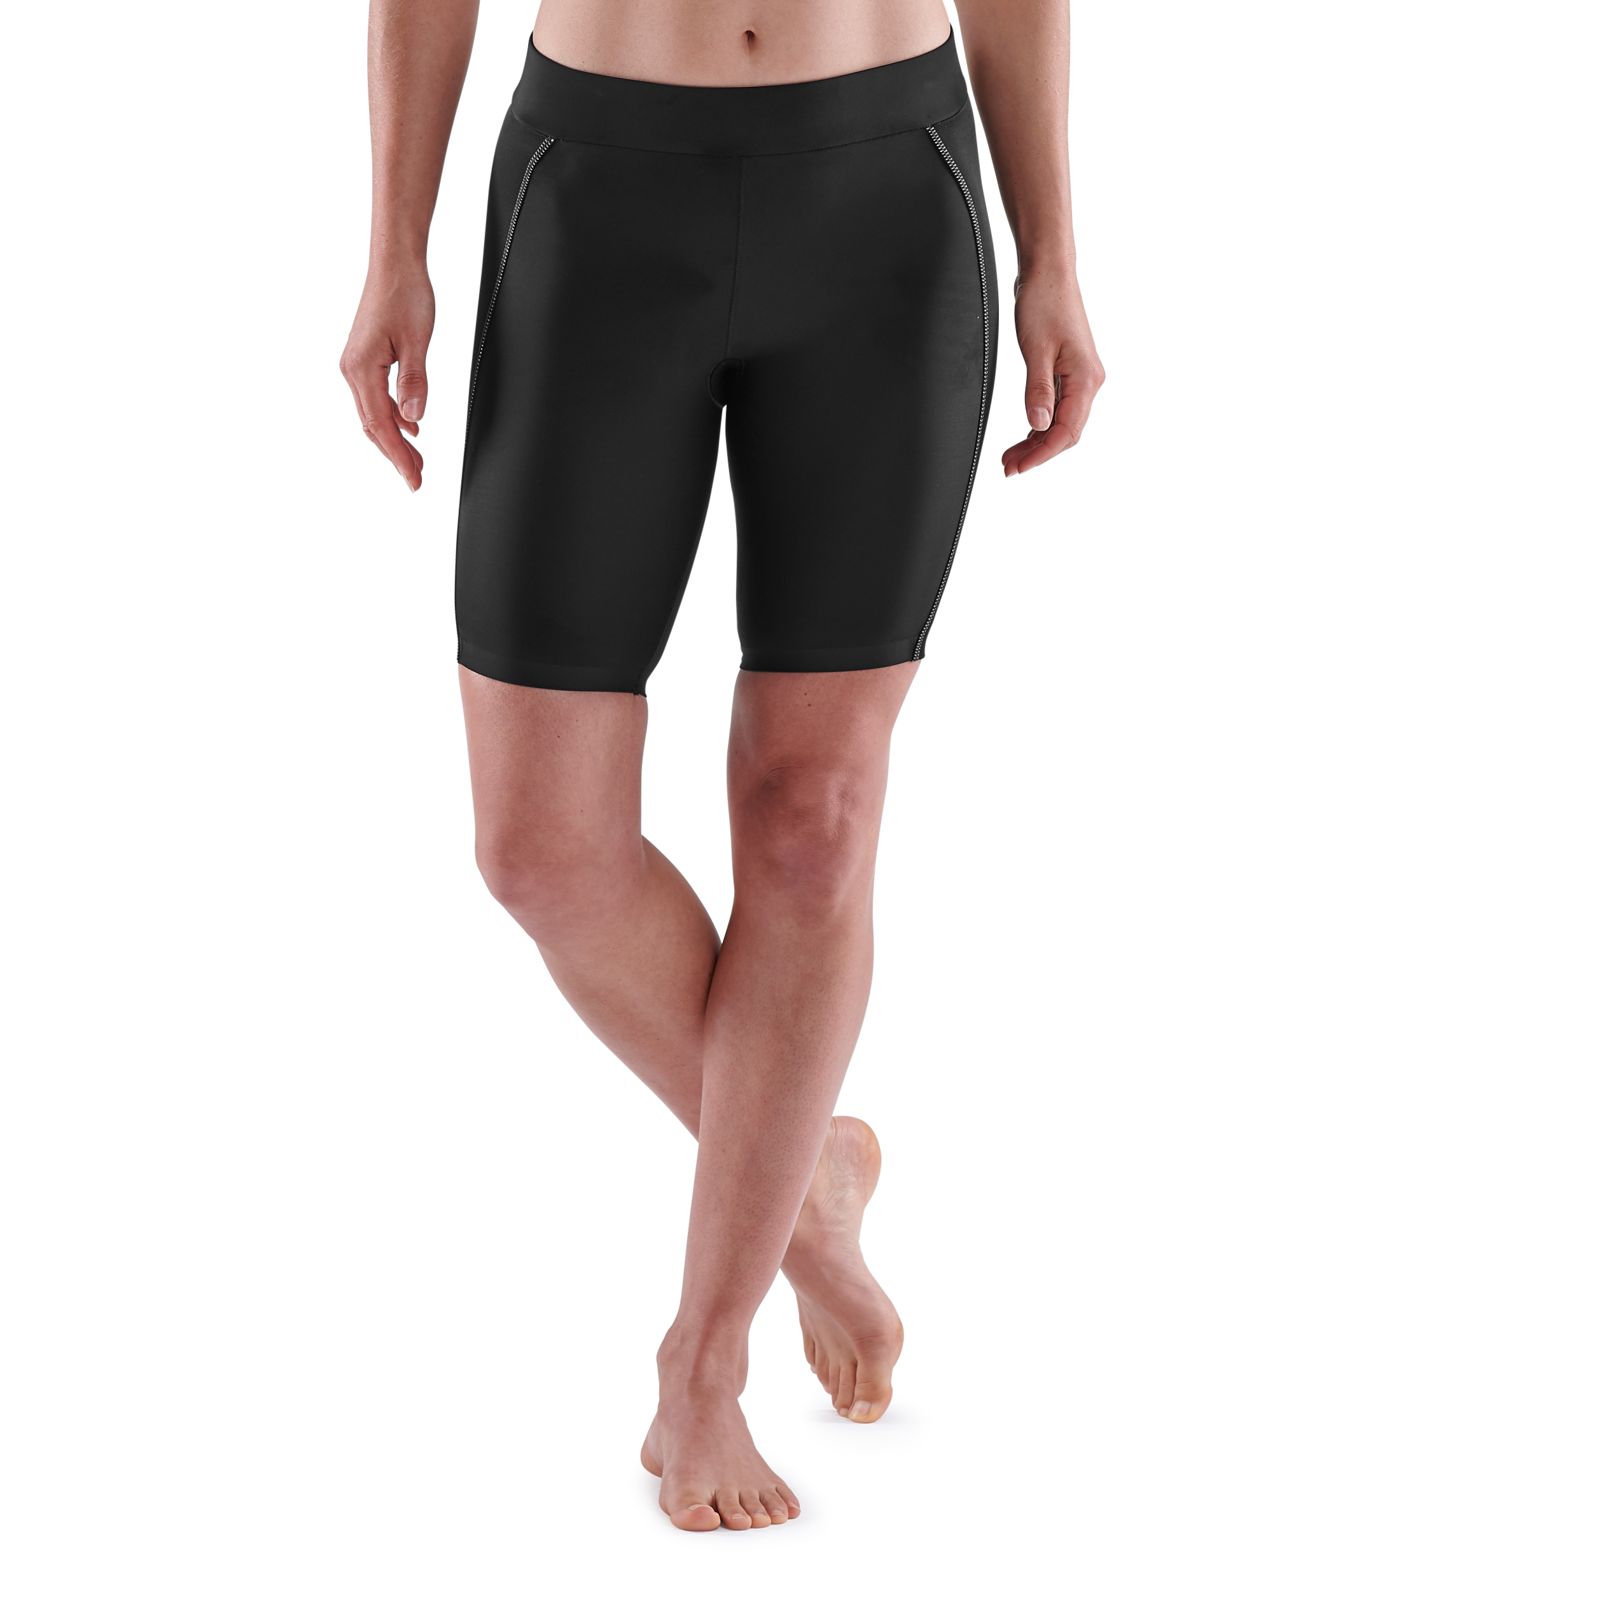  SKINS Men's Series-1 Compression Half Tights/Shorts, Navy Blue,  Small : Clothing, Shoes & Jewelry